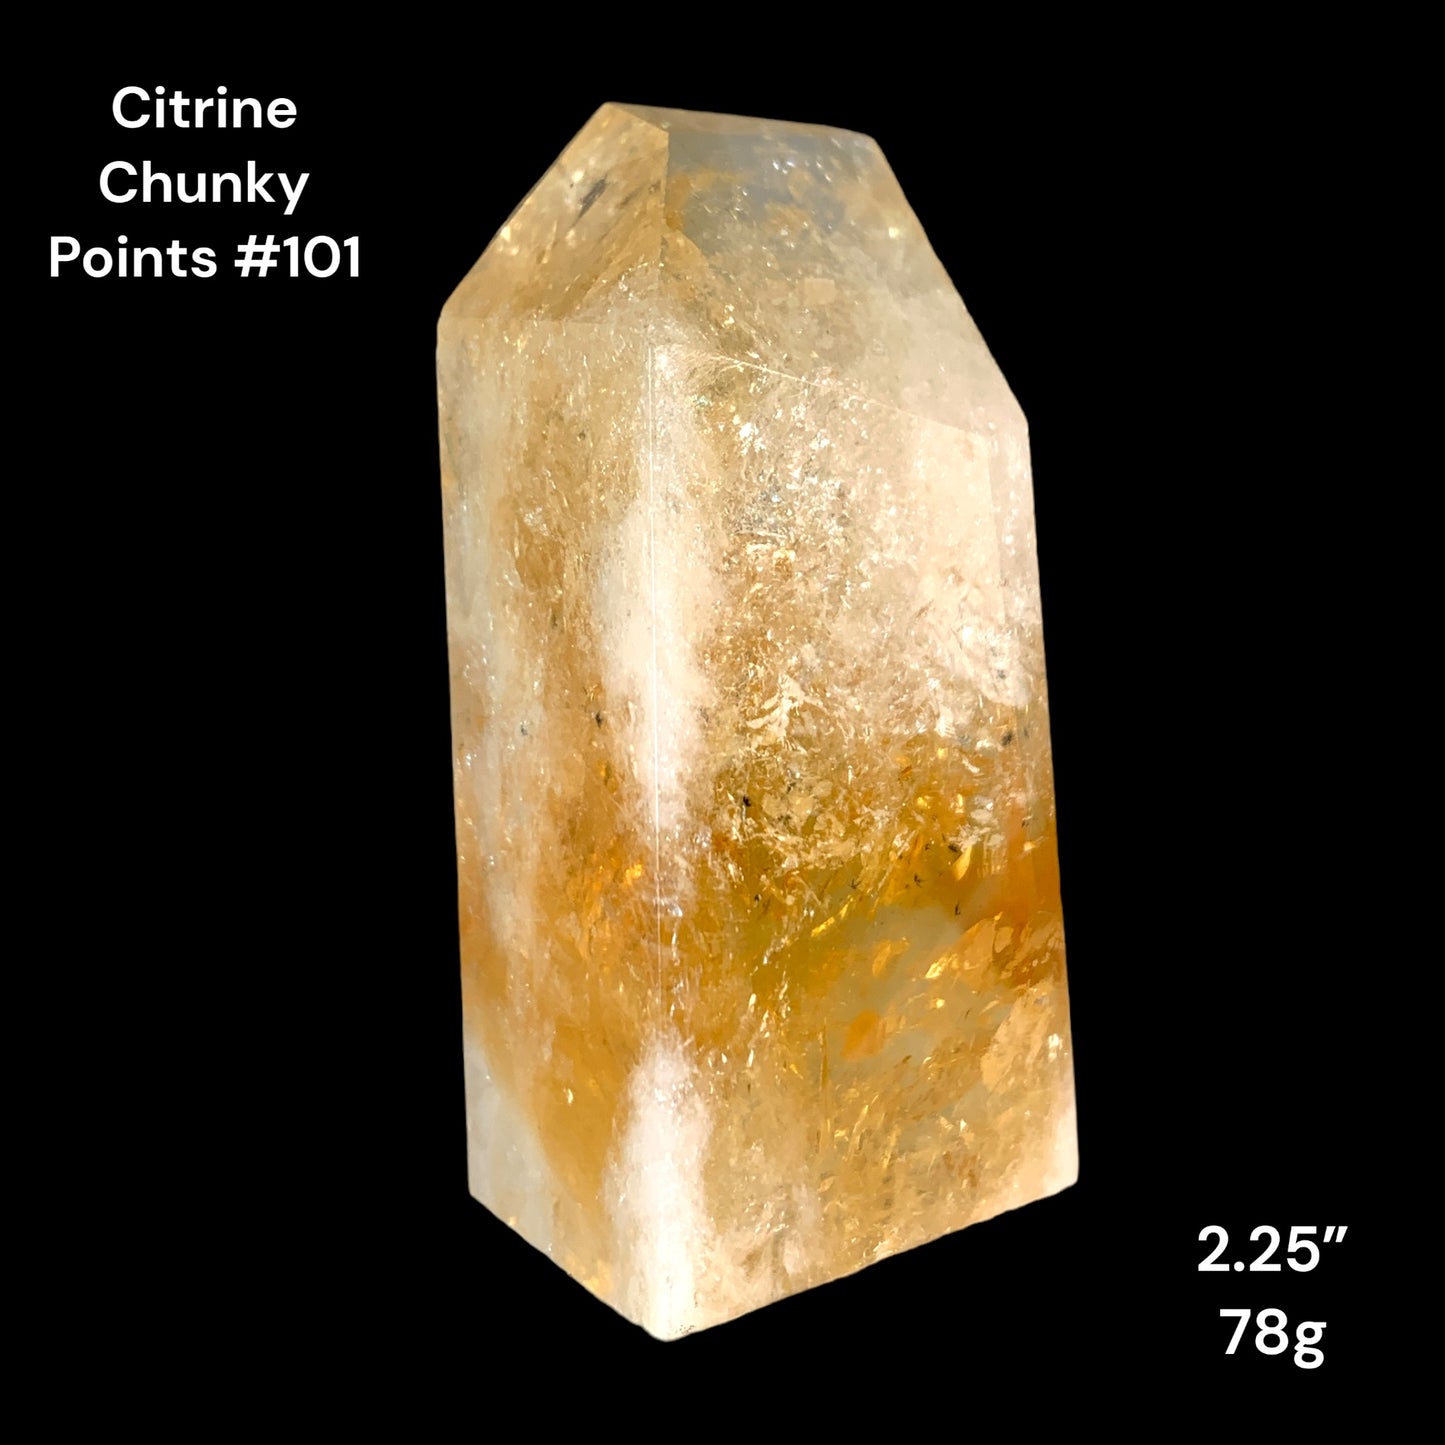 Citrine Chunky Points - Grade AA - 2.5 inch - 78g - Polished Points